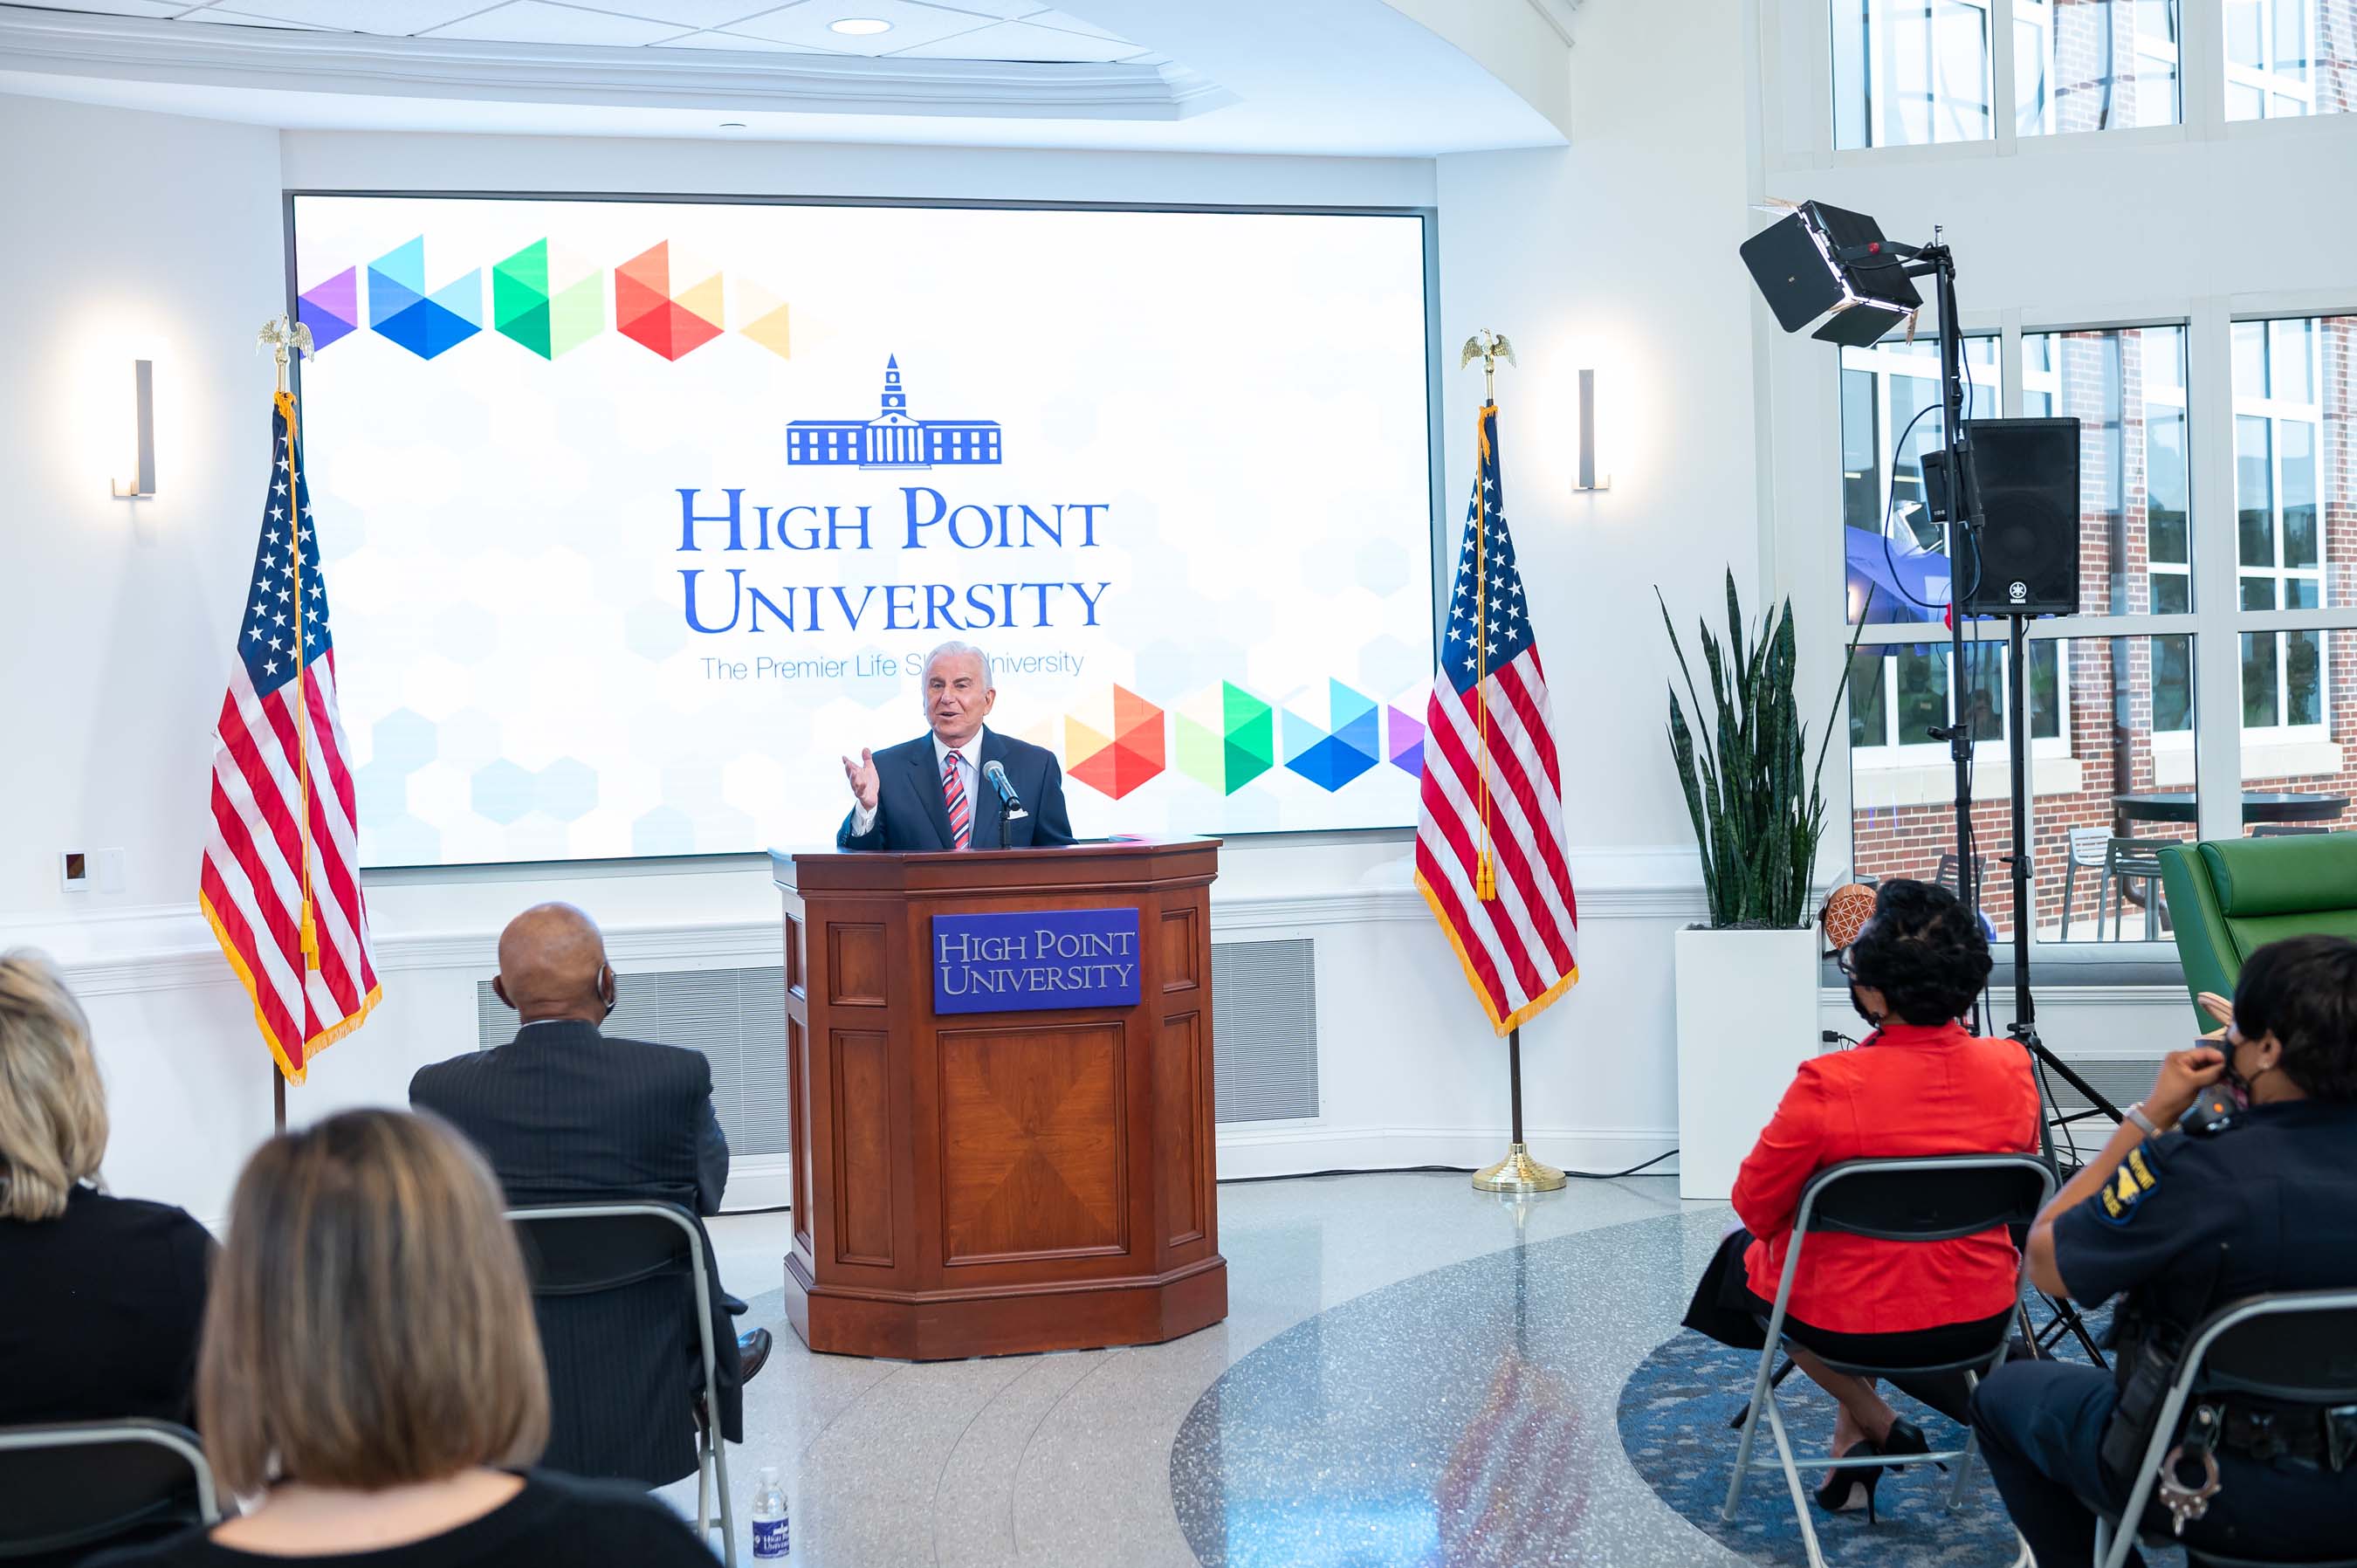 Dr. Nido Qubein, High Point University president, announced today that HPU is issuing a challenge gift up to $500,000 to the High Point Community Investment Campaign, a new fund for minority entrepreneurs in the city, and called on community investors to support the initiative, too.